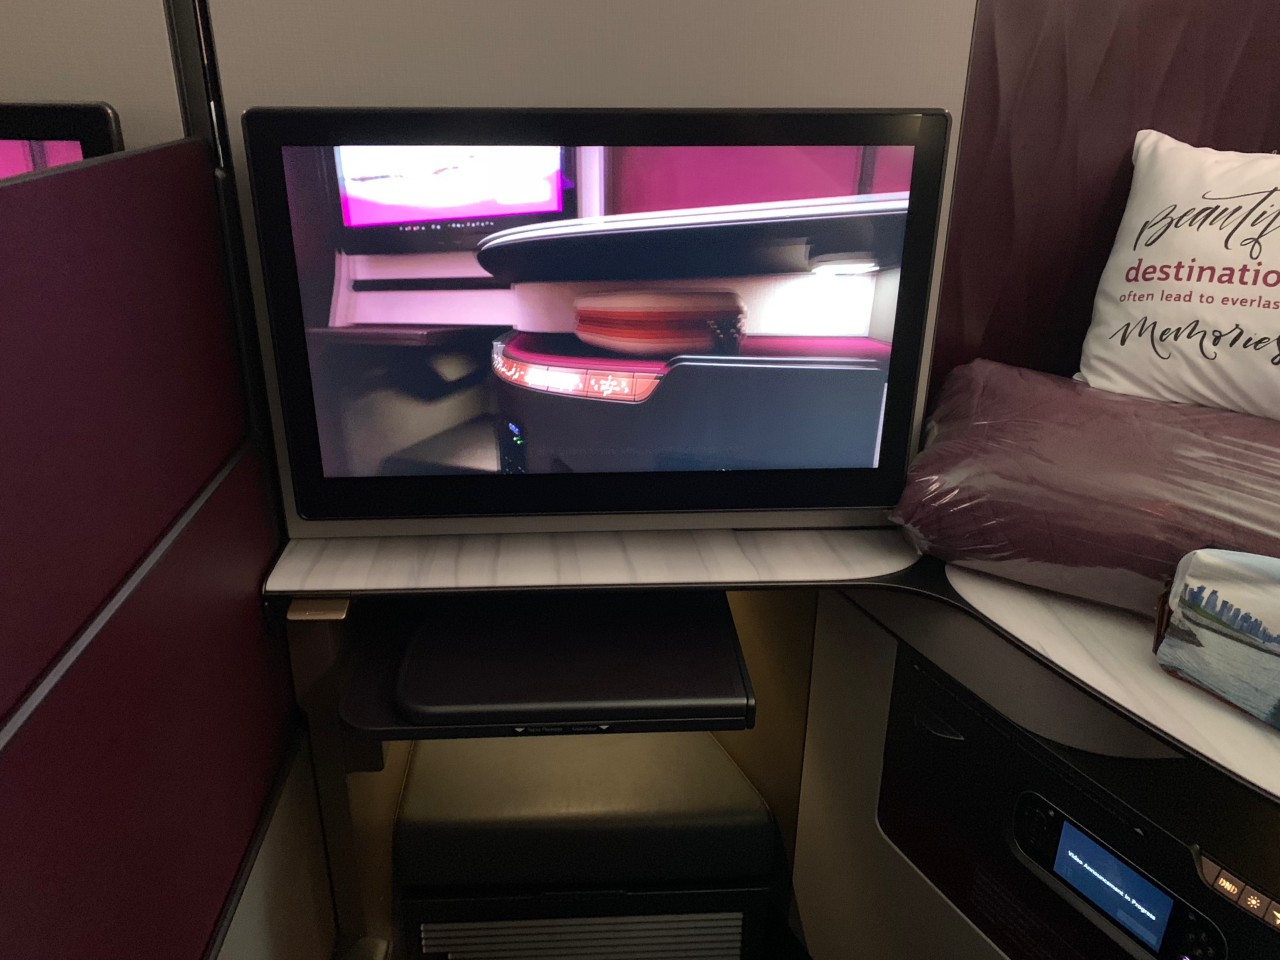 Qatar Qsuites 777 Review: IFE Screen and Footrest / Ottoman